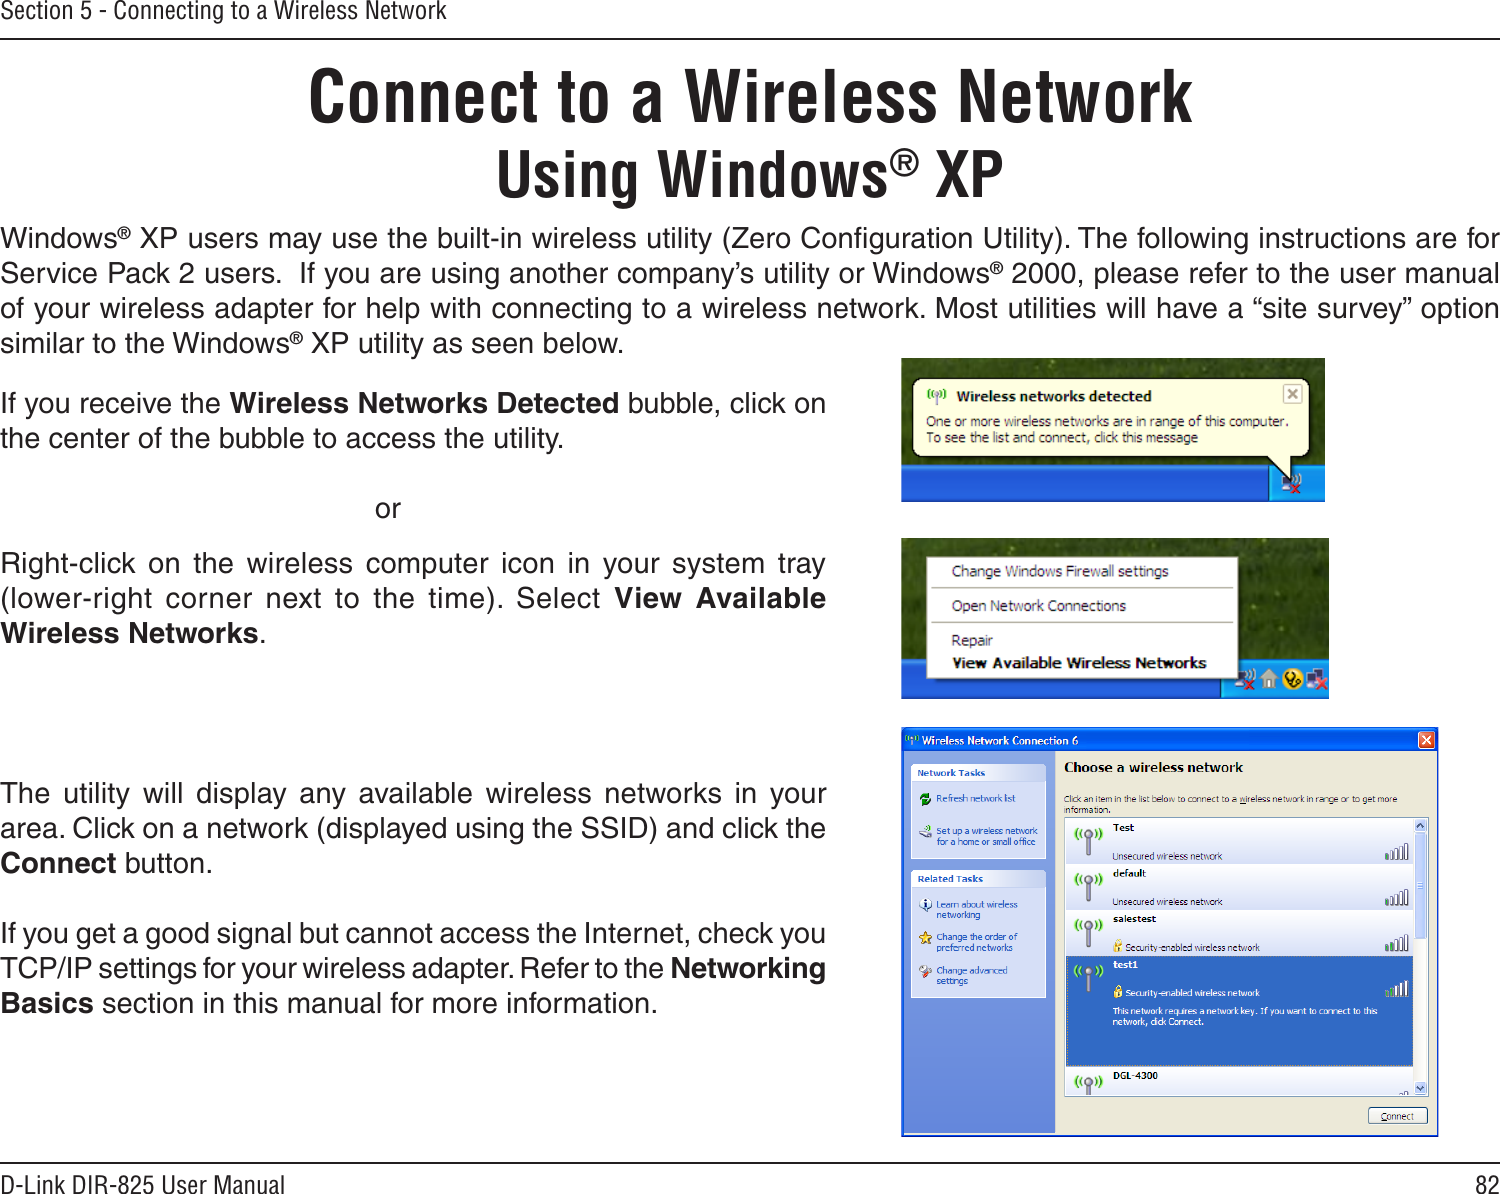 82D-Link DIR-825 User ManualSection 5 - Connecting to a Wireless NetworkConnect to a Wireless NetworkUsing Windows® XPWindows® XP users may use the built-in wireless utility (Zero Conﬁguration Utility). The following instructions are for Service Pack 2 users.  If you are using another company’s utility or Windows® 2000, please refer to the user manual of your wireless adapter for help with connecting to a wireless network. Most utilities will have a “site survey” option similar to the Windows® XP utility as seen below.Right-click  on  the  wireless  computer  icon  in  your  system  tray (lower-right  corner  next  to  the  time).  Select  View  Available Wireless Networks.If you receive the Wireless Networks Detected bubble, click on the center of the bubble to access the utility.     orThe  utility  will  display  any  available  wireless  networks  in  your area. Click on a network (displayed using the SSID) and click the Connect button.If you get a good signal but cannot access the Internet, check you TCP/IP settings for your wireless adapter. Refer to the Networking Basics section in this manual for more information.